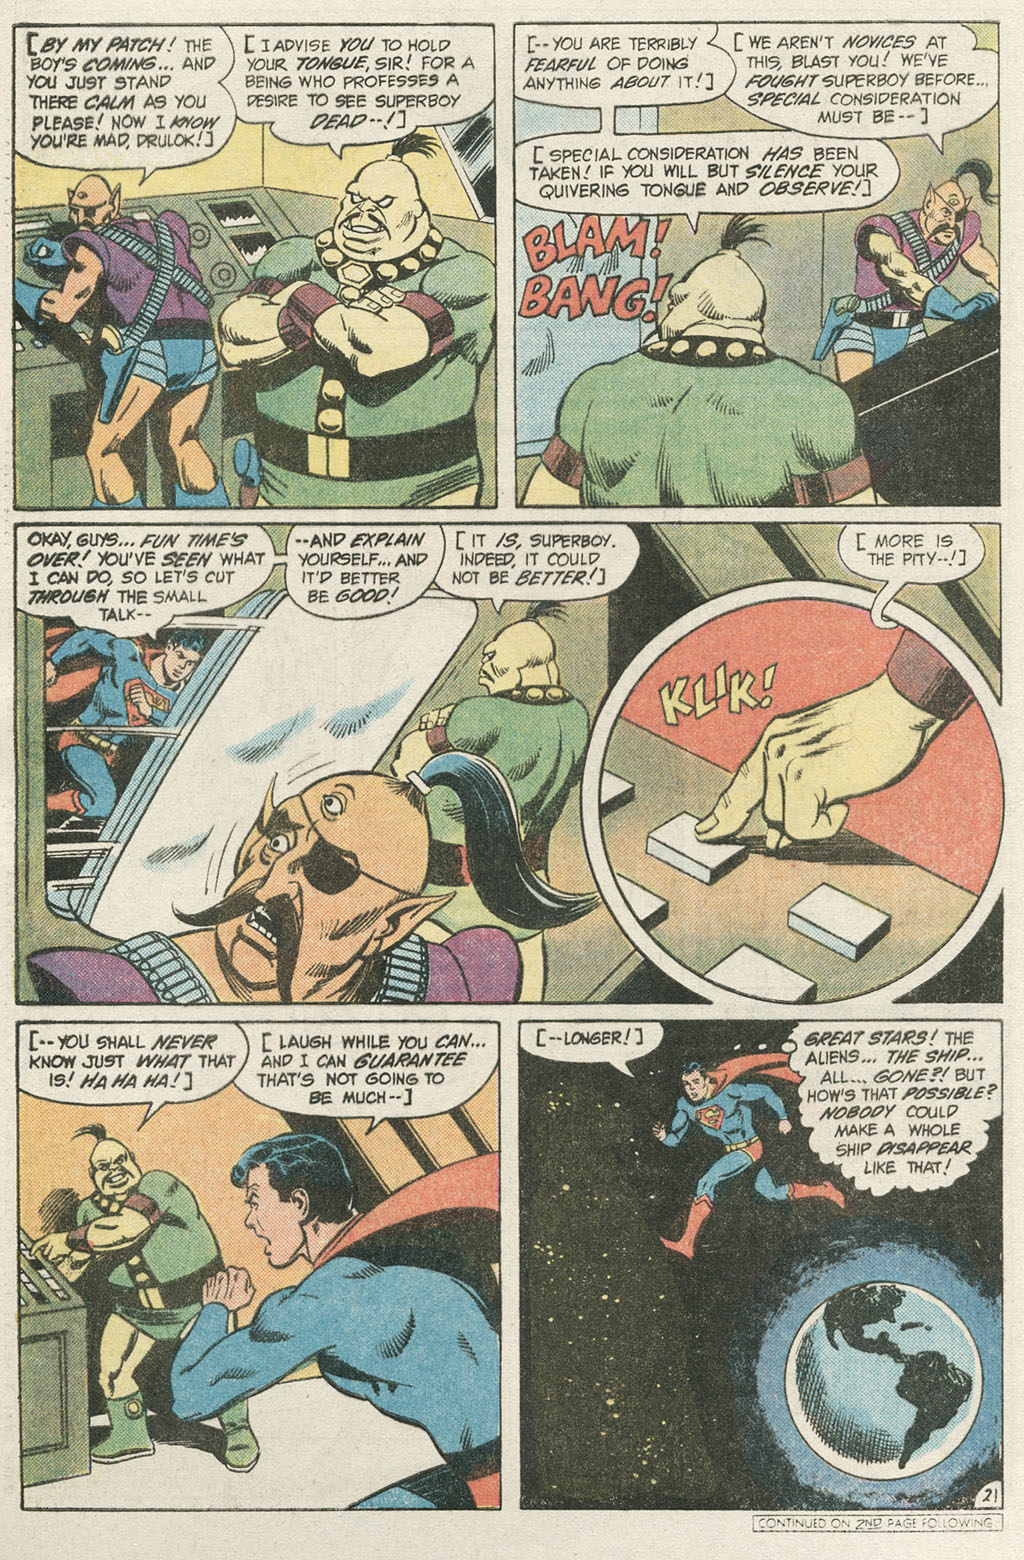 The New Adventures of Superboy 53 Page 26